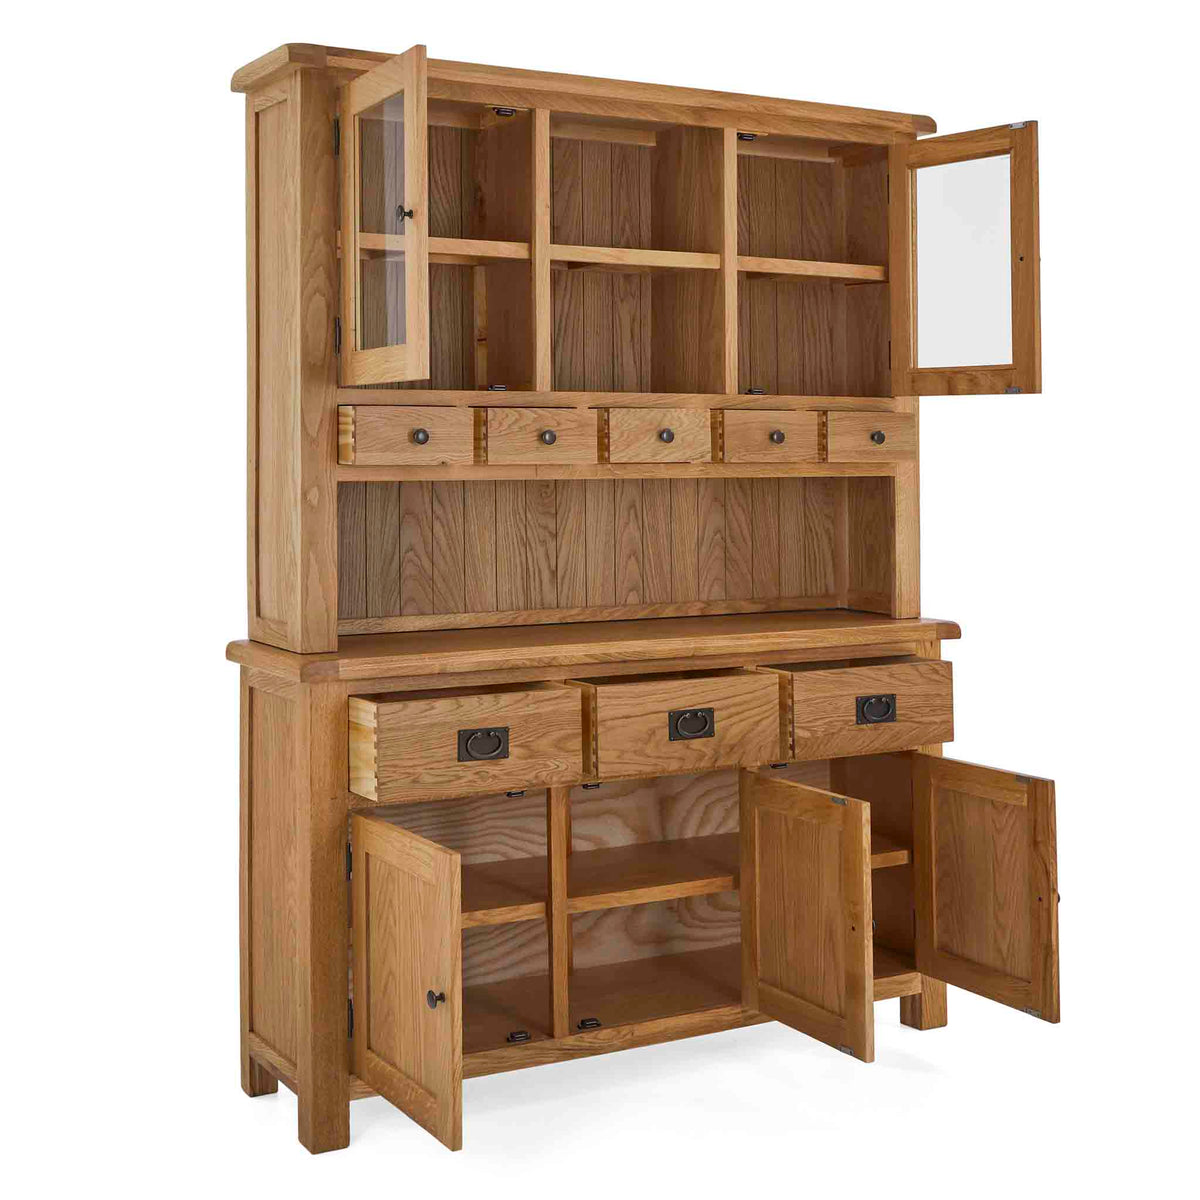 Zelah Oak Large Dresser - Side view with cupboards and drawers open